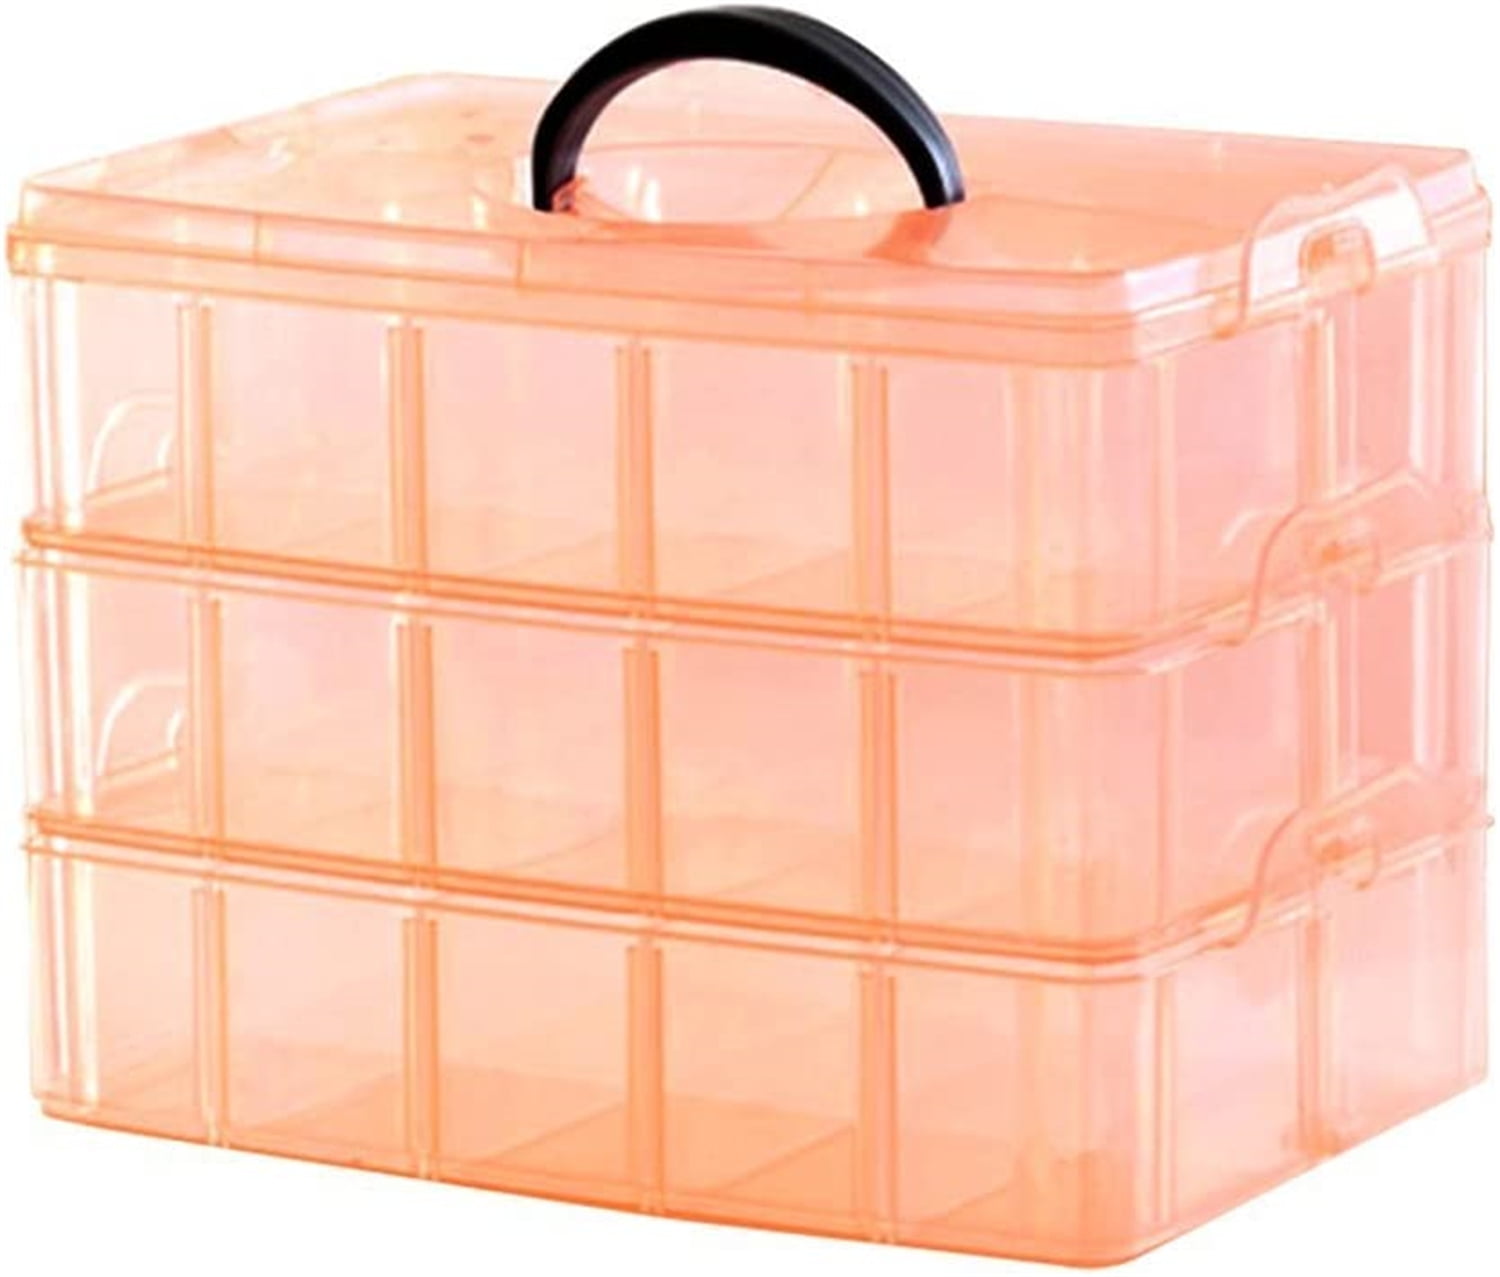 SE Adjustable 26-Compartment Plastic Storage Box - 18x12x3 Inch Organizer  with Triple Lock, Translucent Lid, and Sturdy Handle - Ideal for Tools